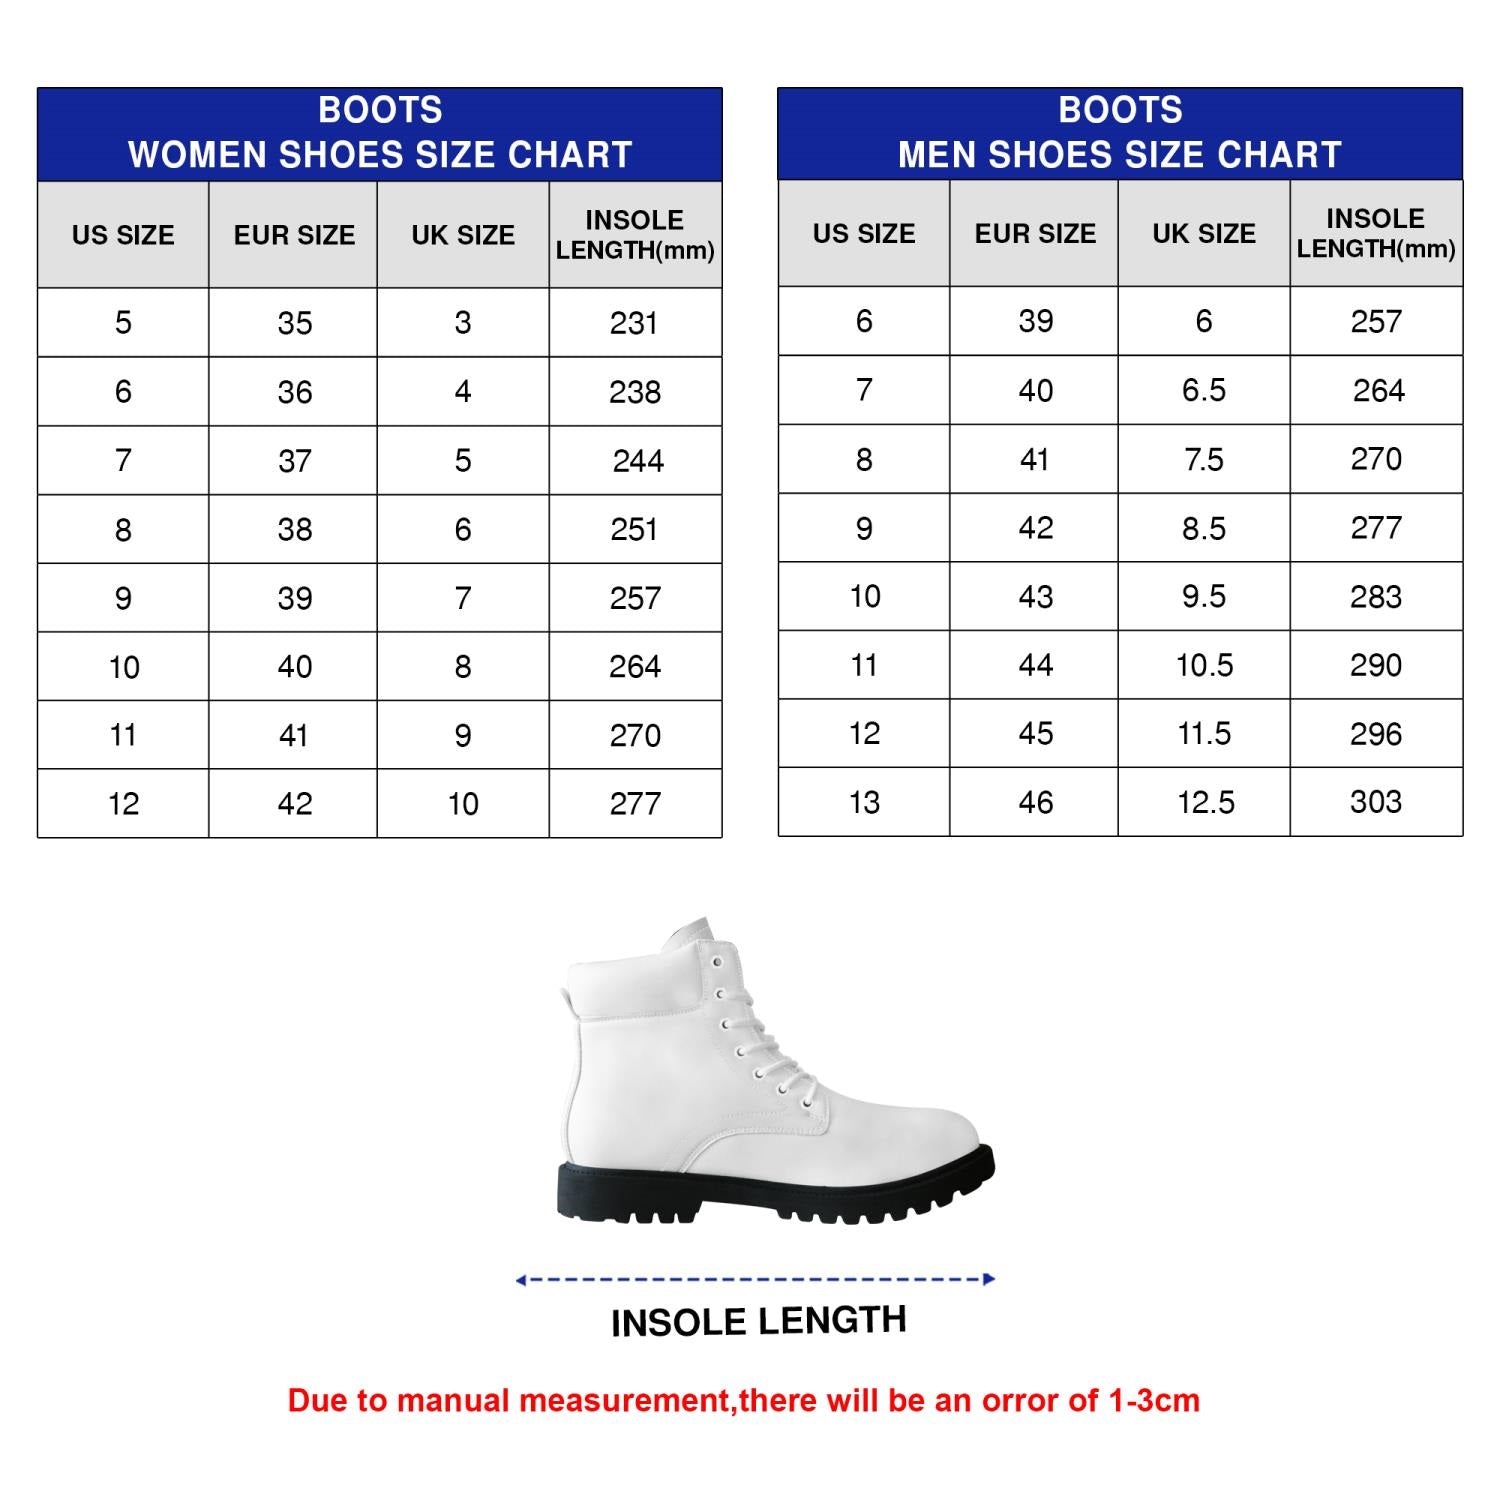 Jesus Tbl Boots 1 - Christian Shoes For Men And Women